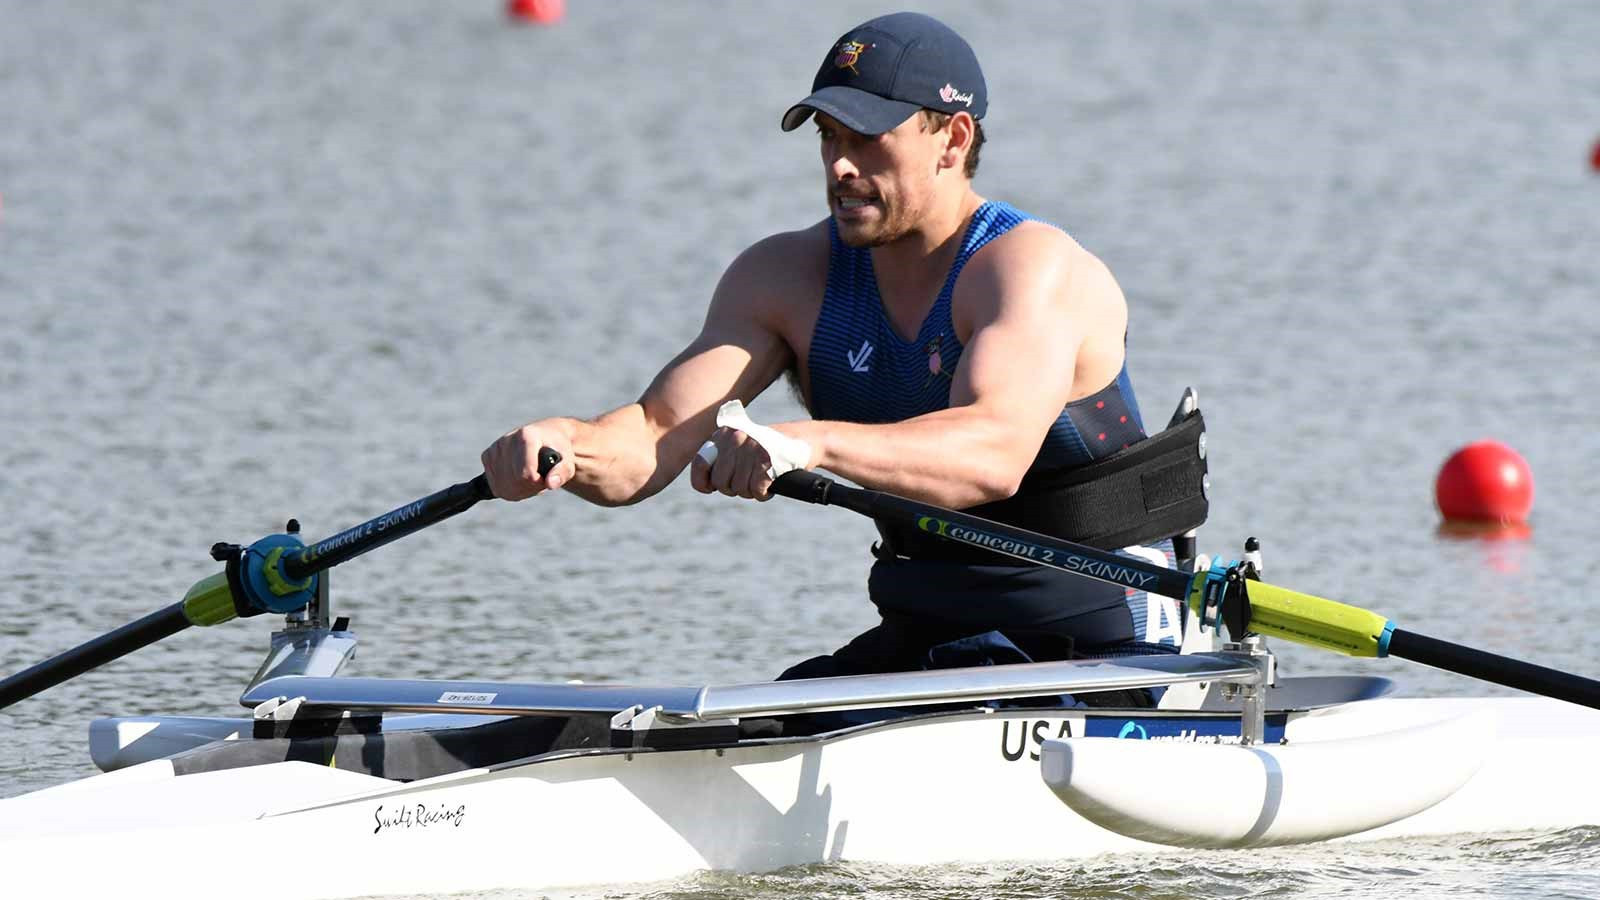 American Blake Haxton was among the other qualifiers today ©US Rowing